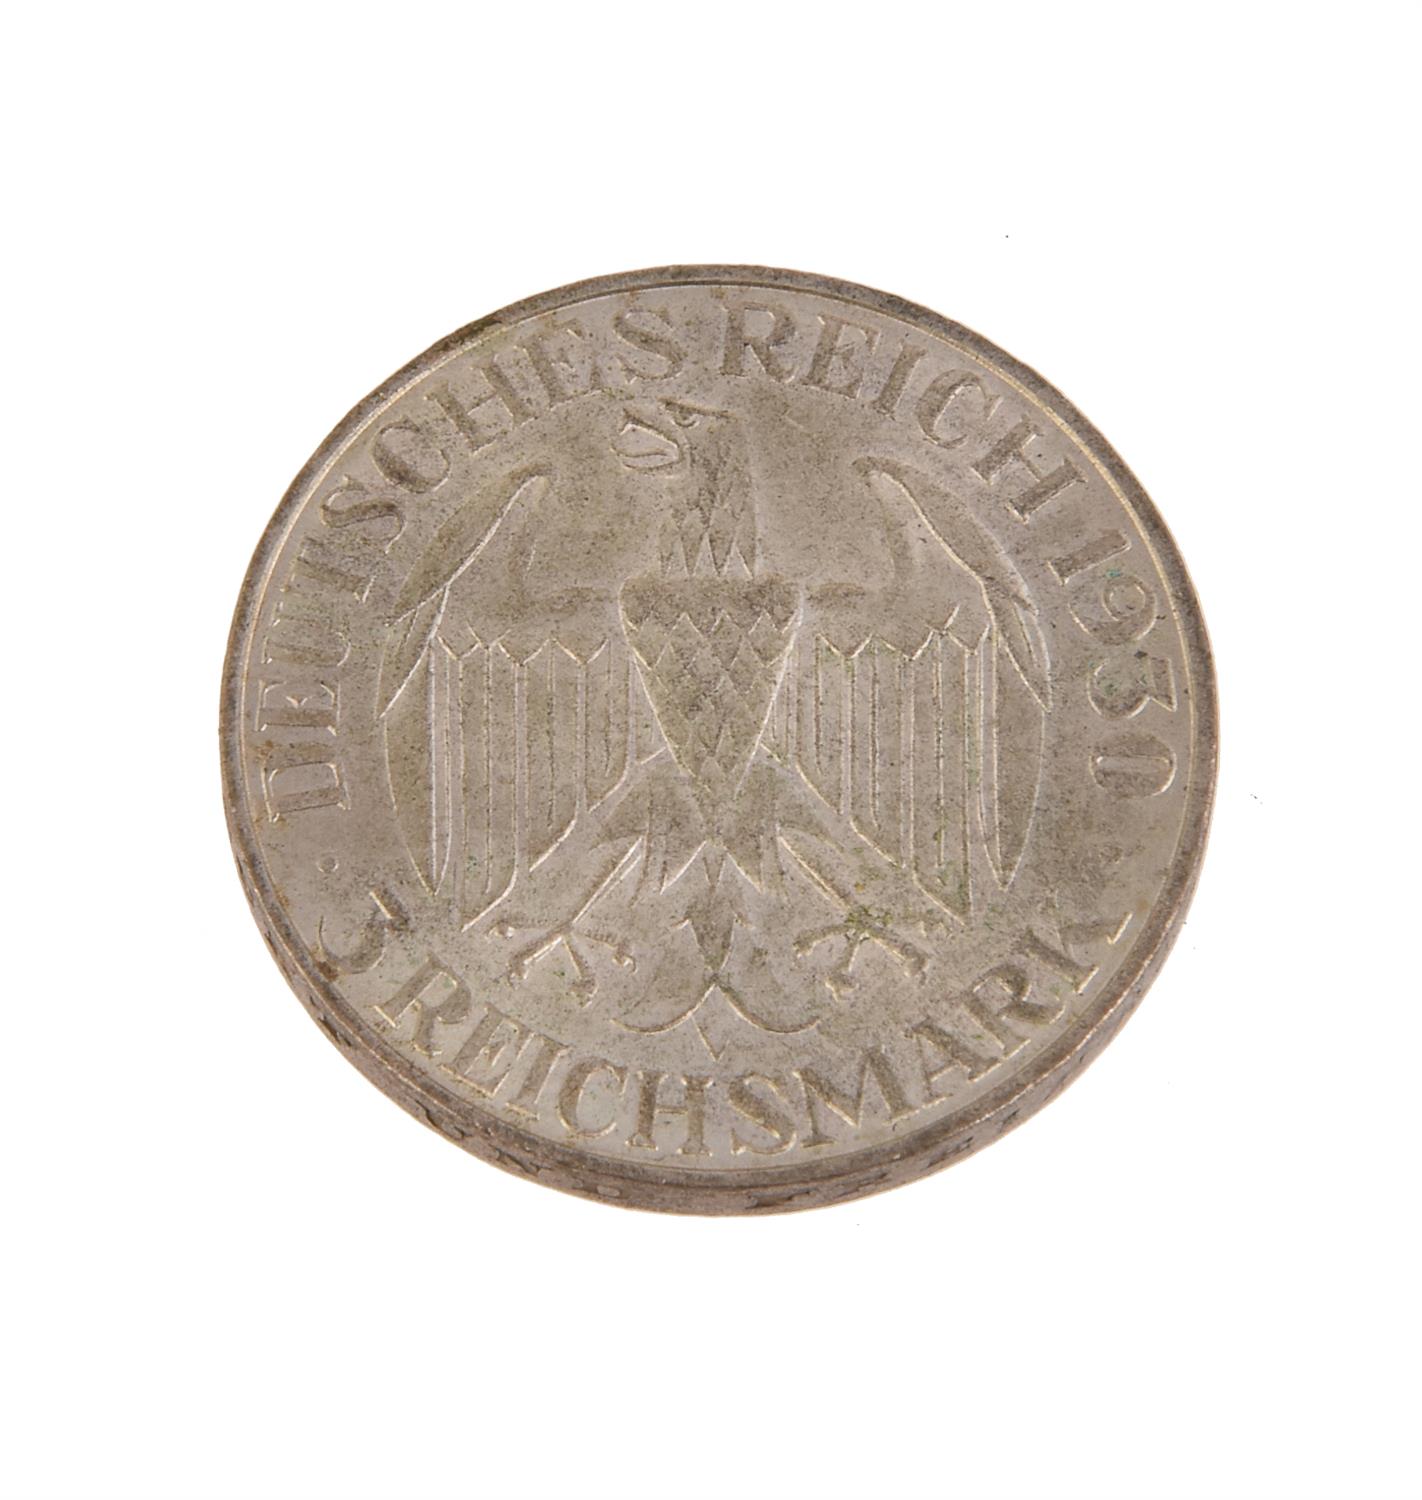 Germany-5, Weimar Republic, 3-Reichsmark 1930A - Image 2 of 2